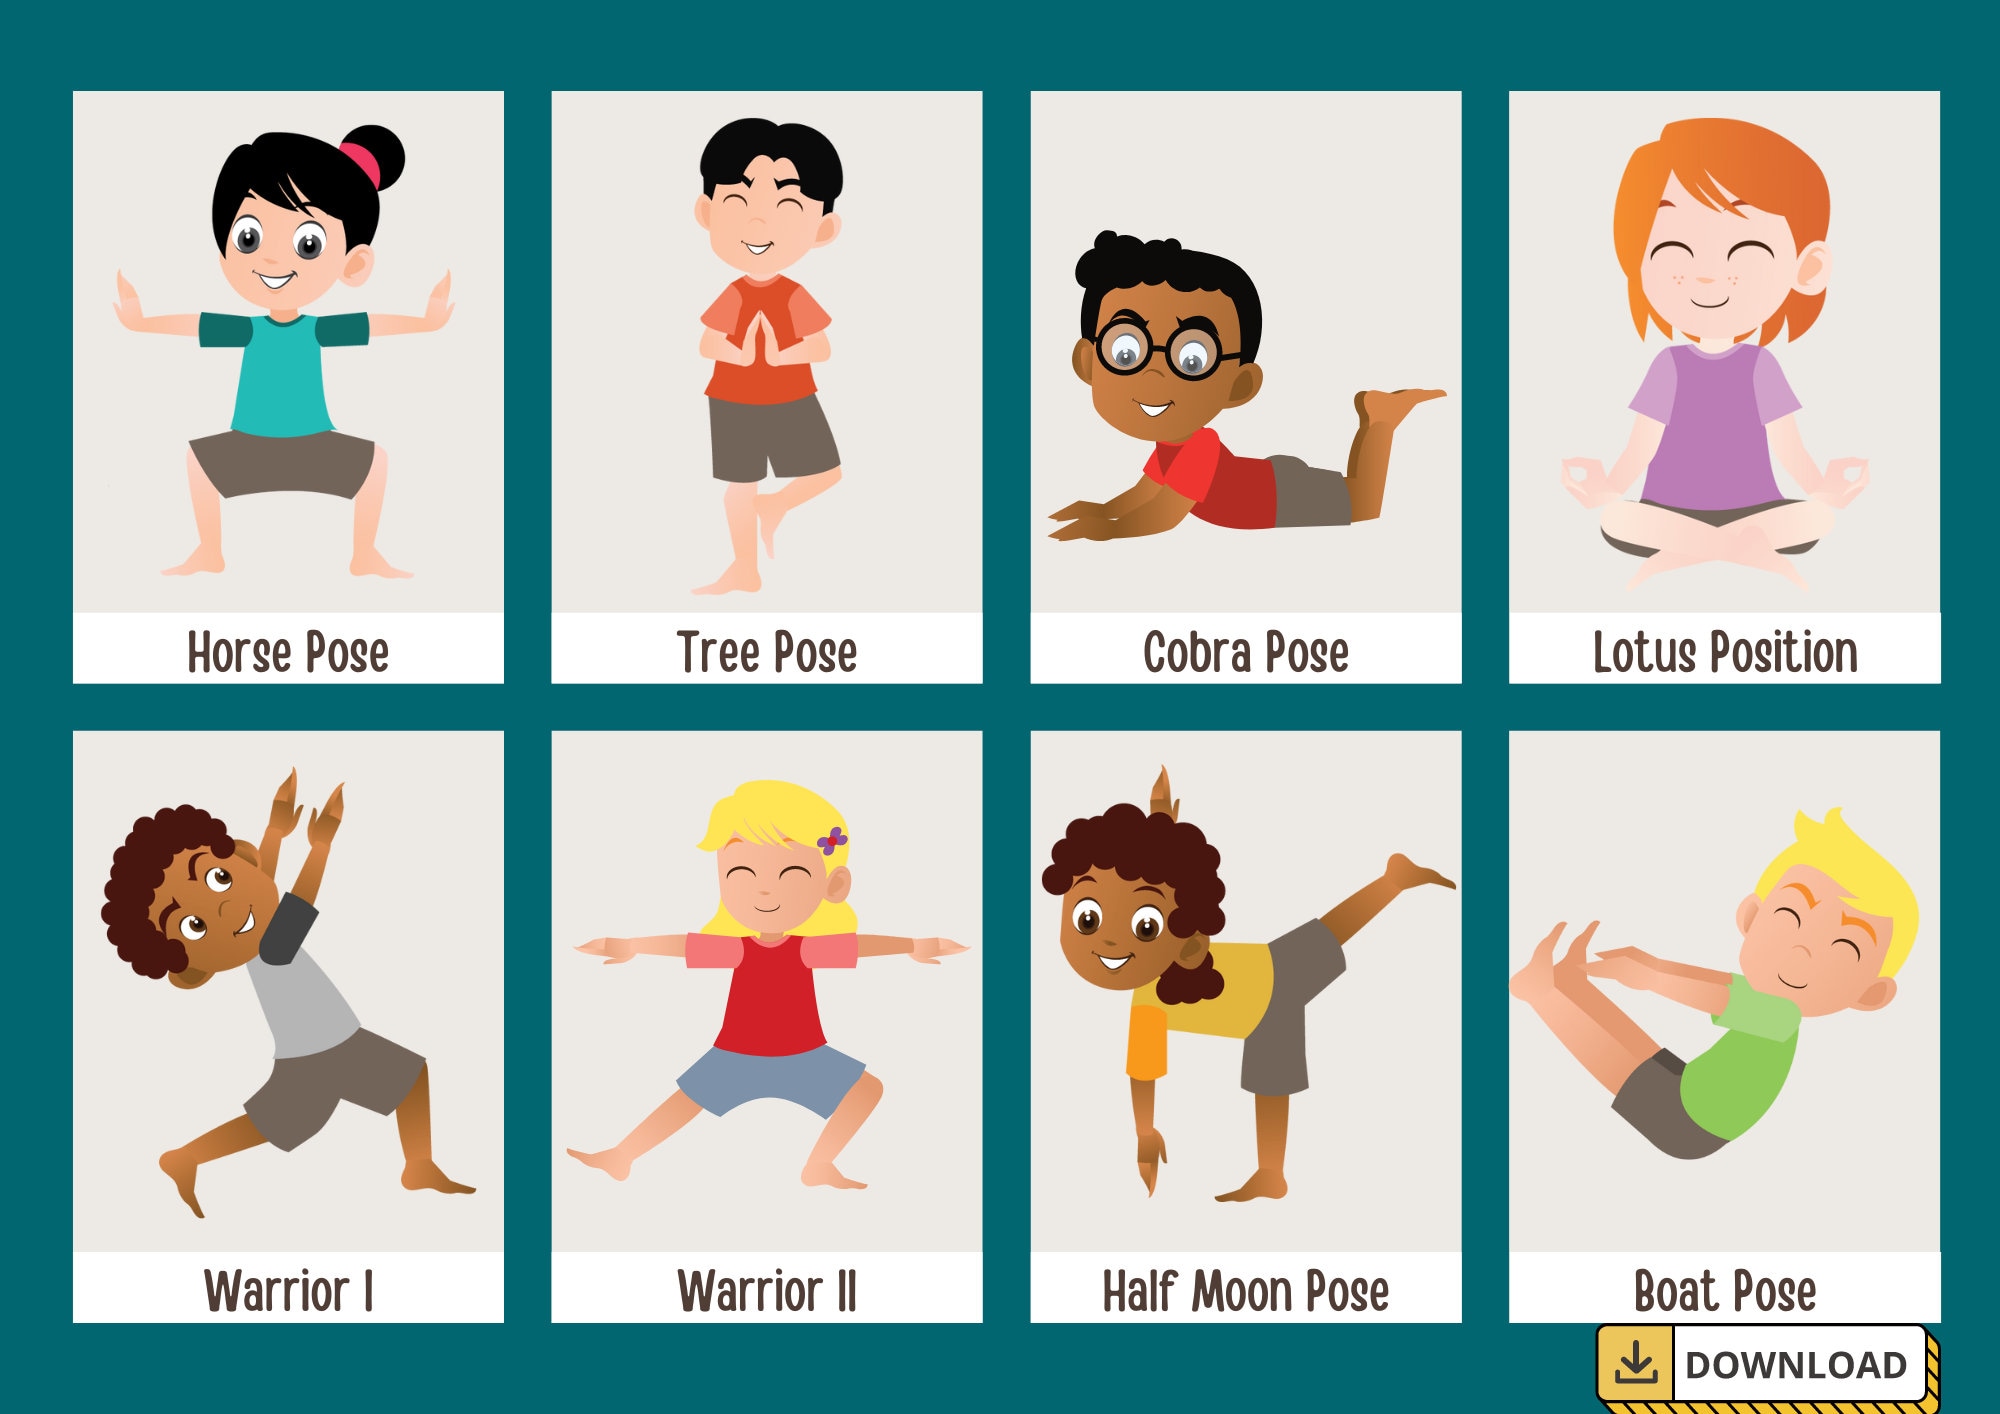 6 Easy Yoga Poses For Kids To Improve Their Overall Health-cheohanoi.vn